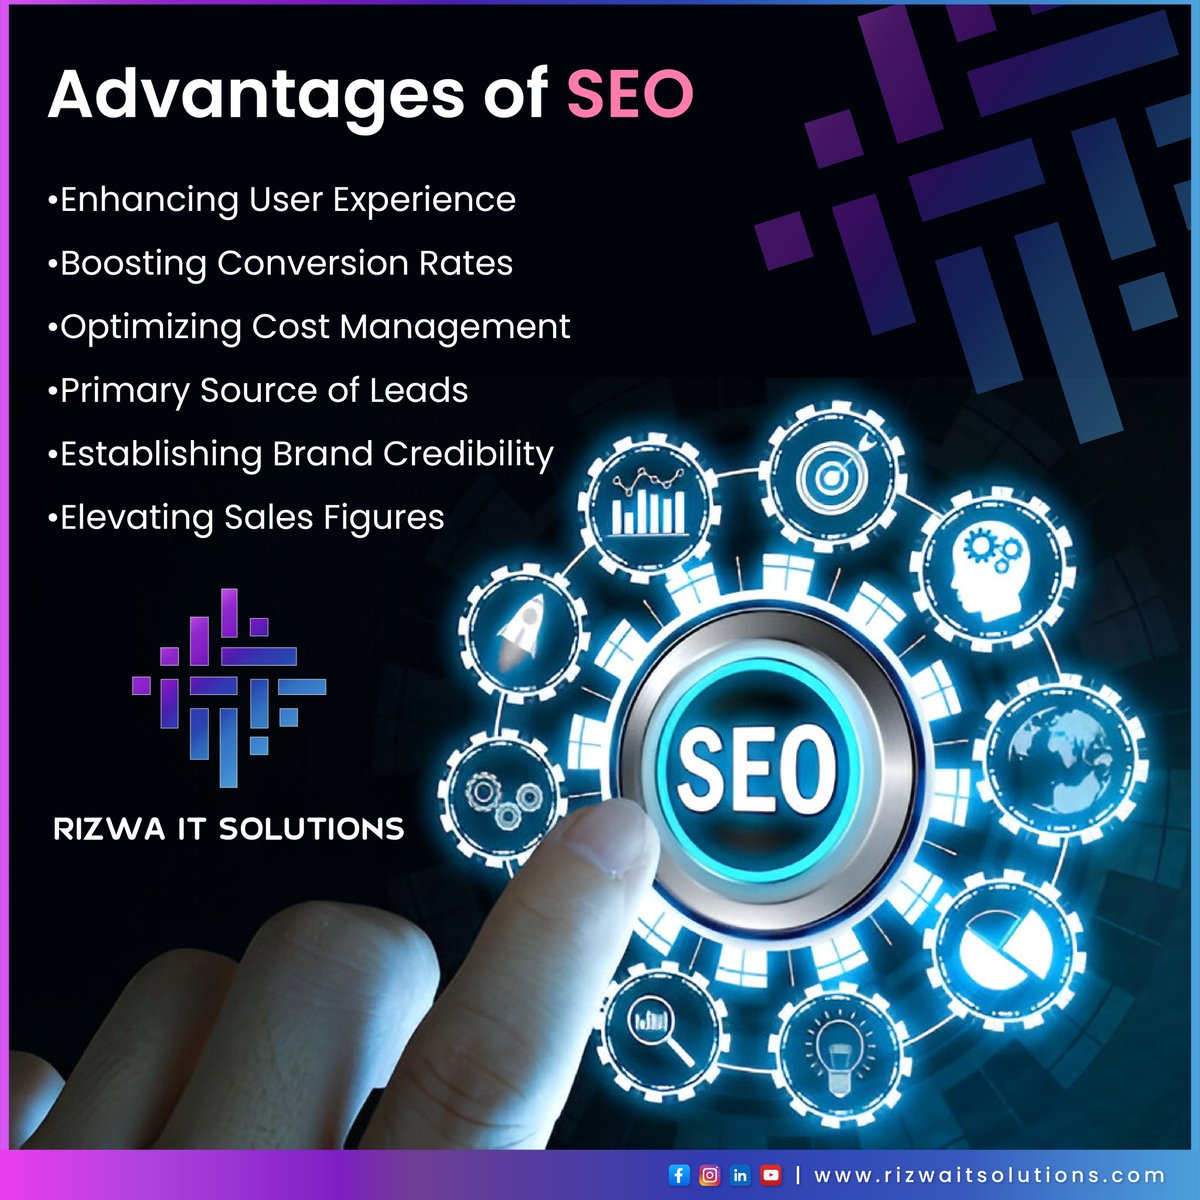 Boost your online presence with the incredible advantages of Search Engine Optimization! Enhance visibility, increase traffic, and dominate the digital landscape.
#SEO #DigitalMarketingTips #SEOAdvantages #SearchEngineOptimization #RizwaITSolutions #RIS #OnlineVisibility